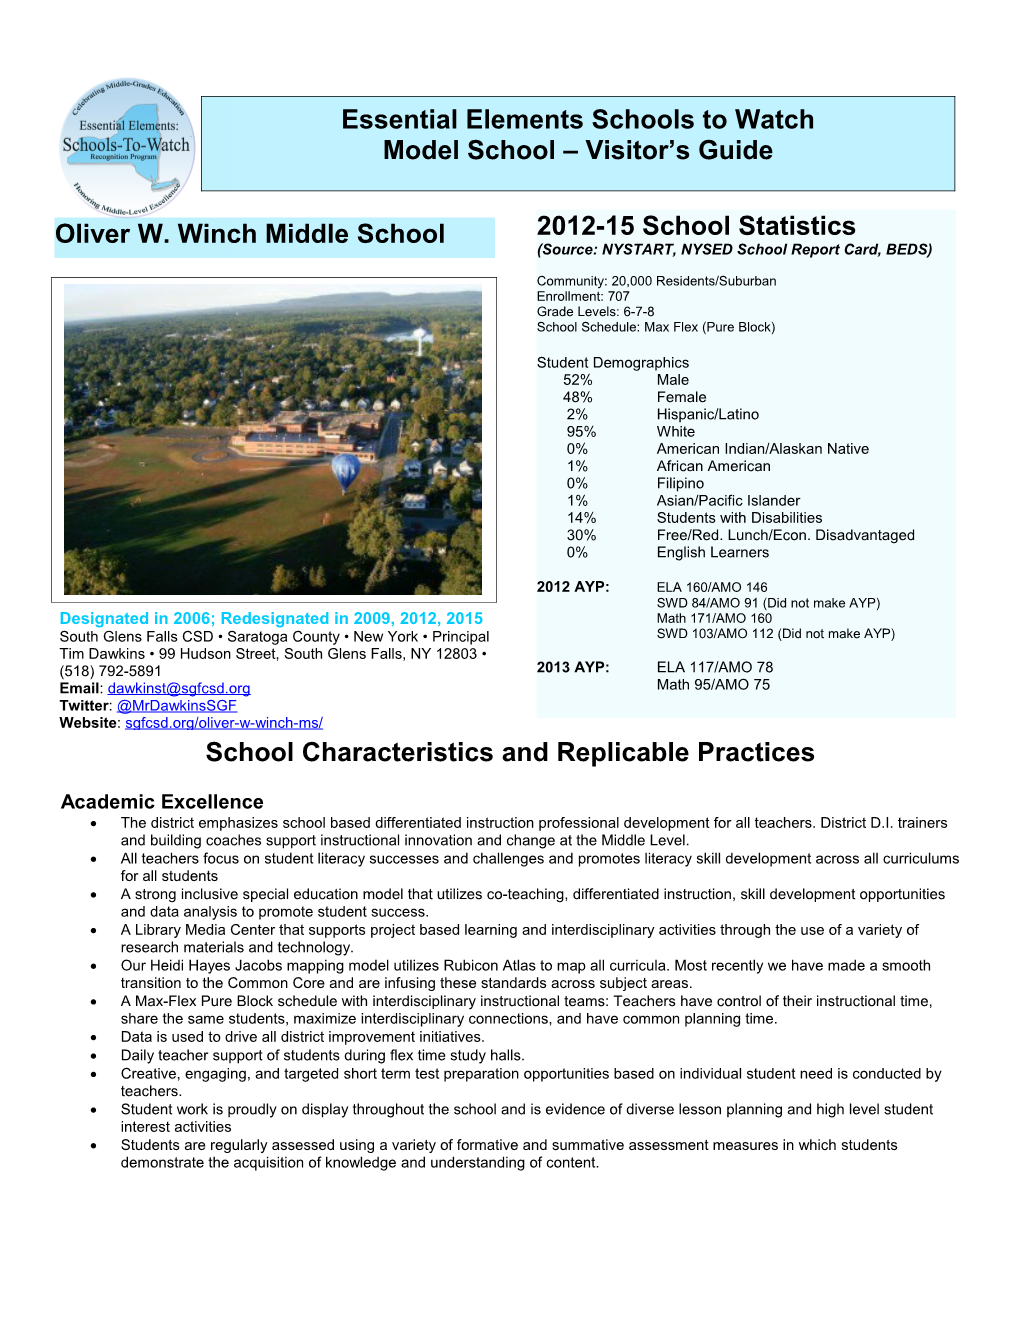 Frank Wright Middle School Profile 2006 - Virtual Library (CA Dept of Education)